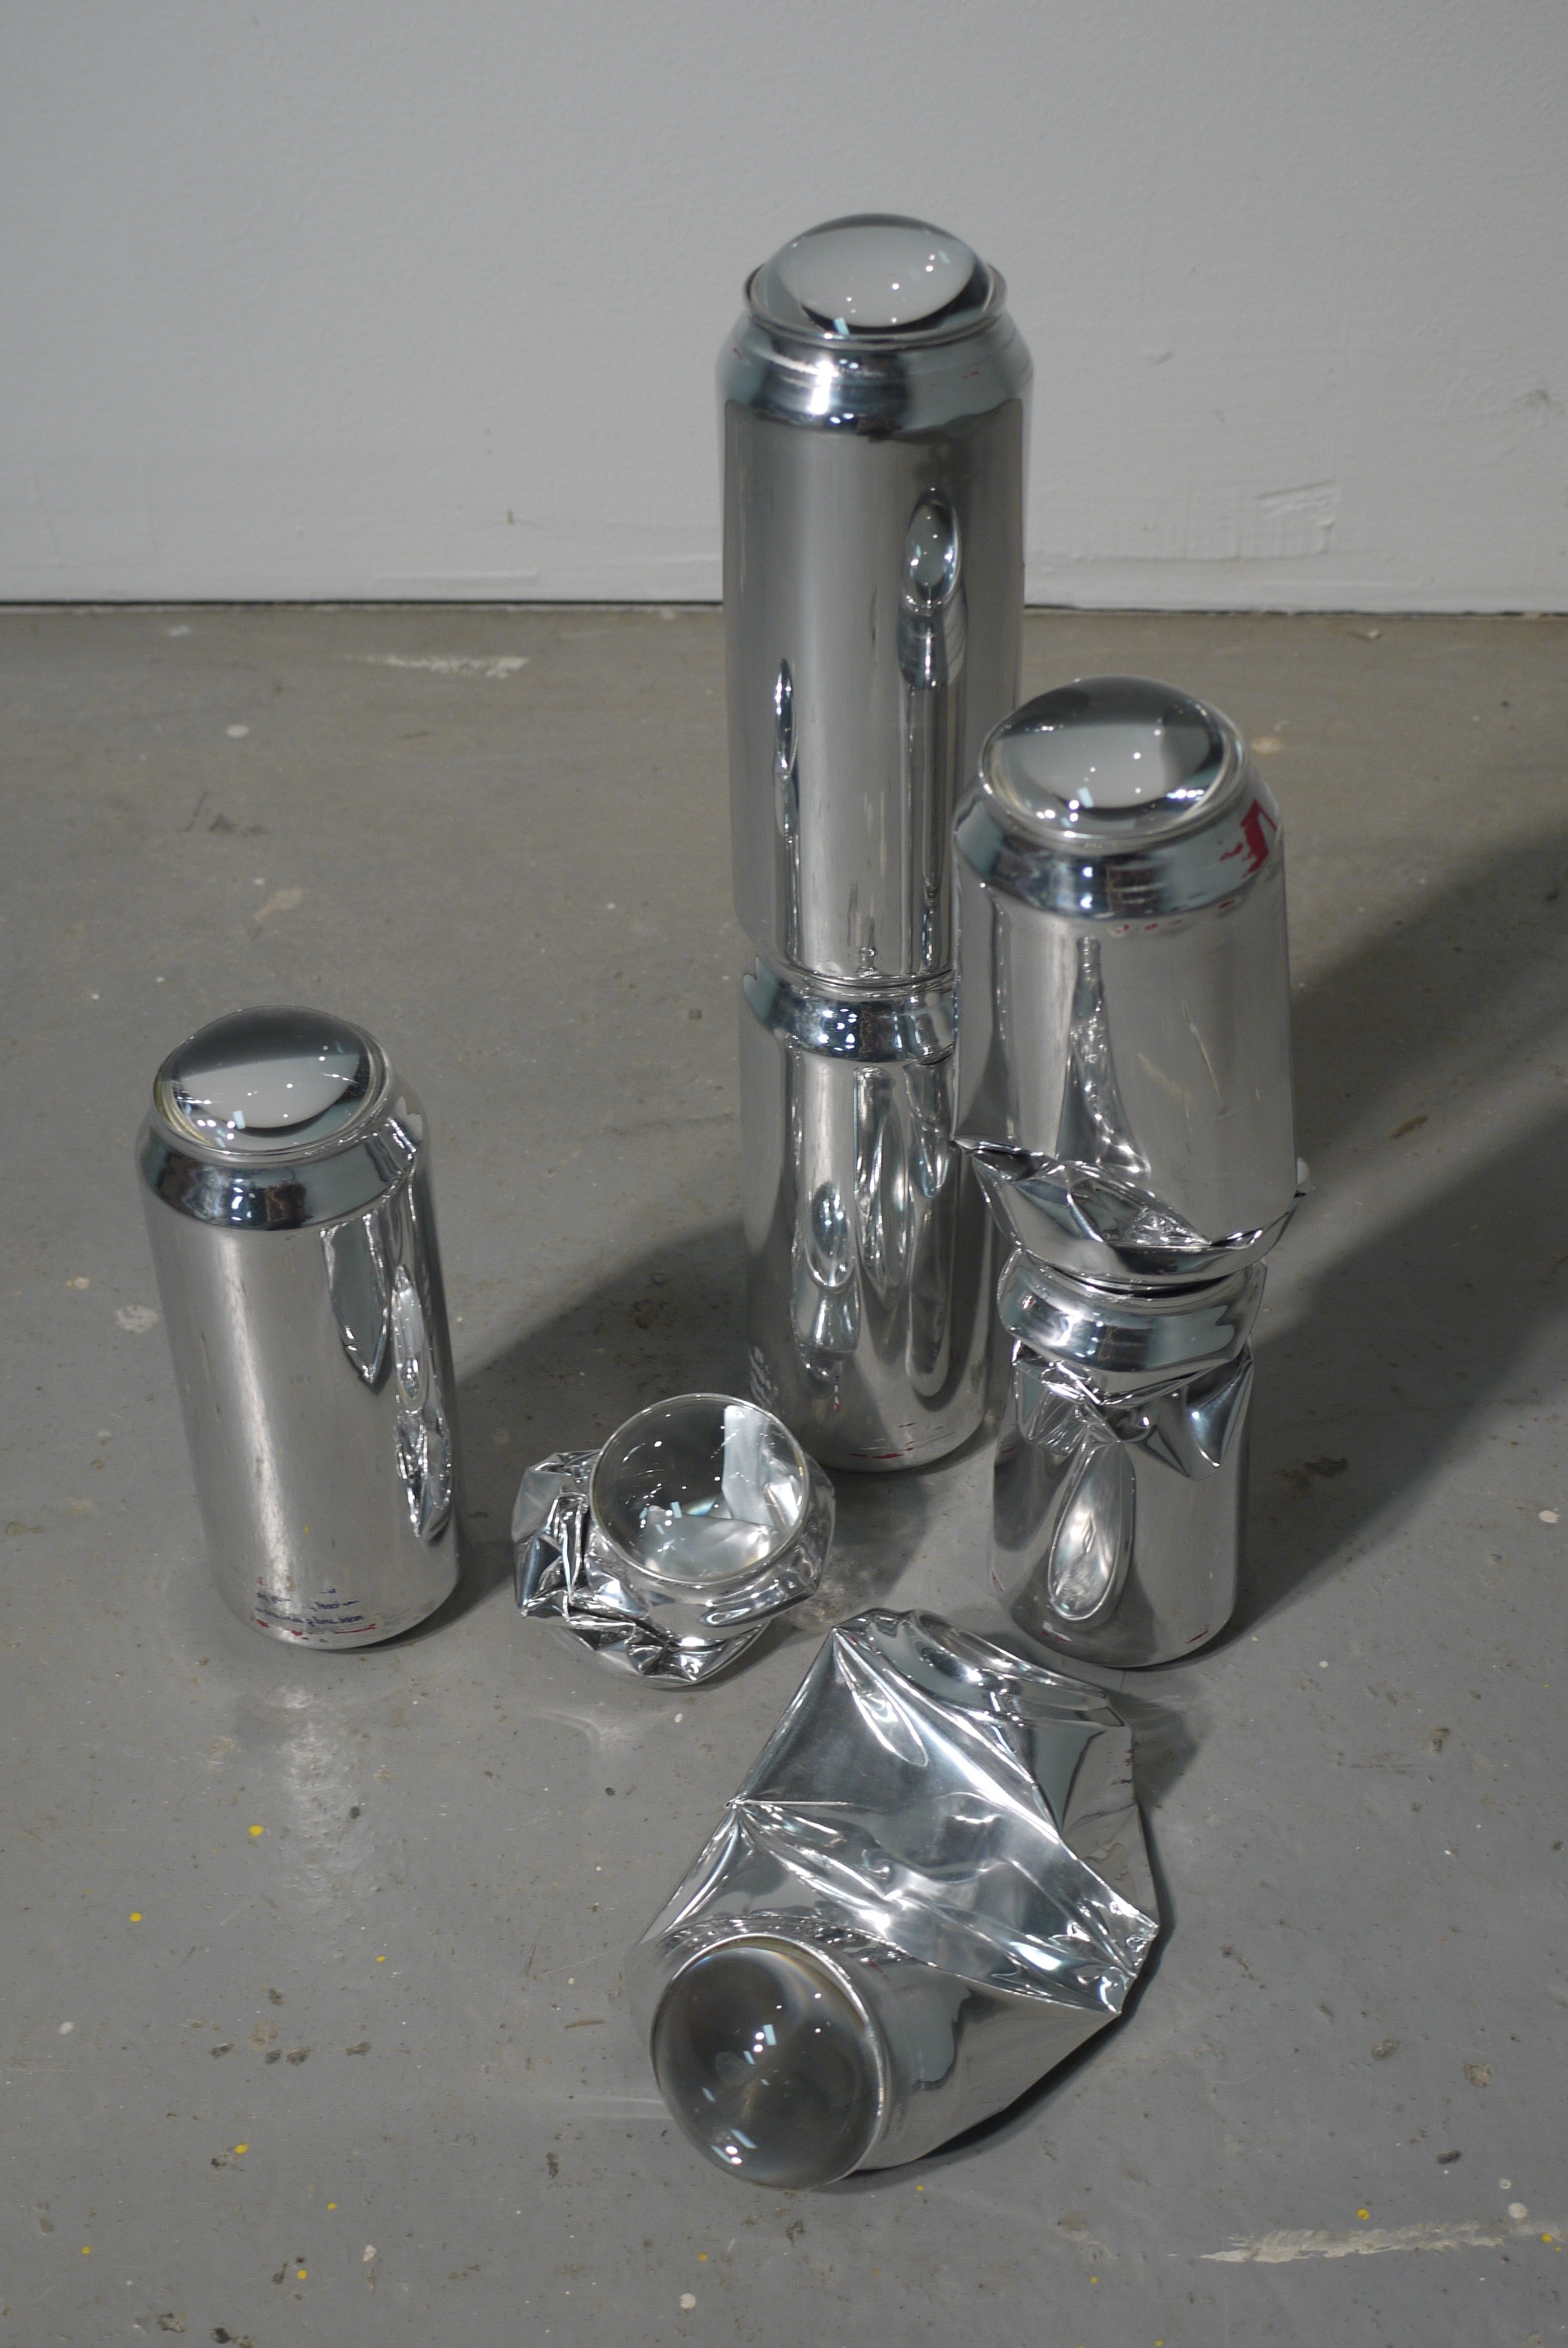  Lungs,&nbsp;2010, dimensions variable, high polished beer cans, projector lenses &nbsp; &nbsp; 